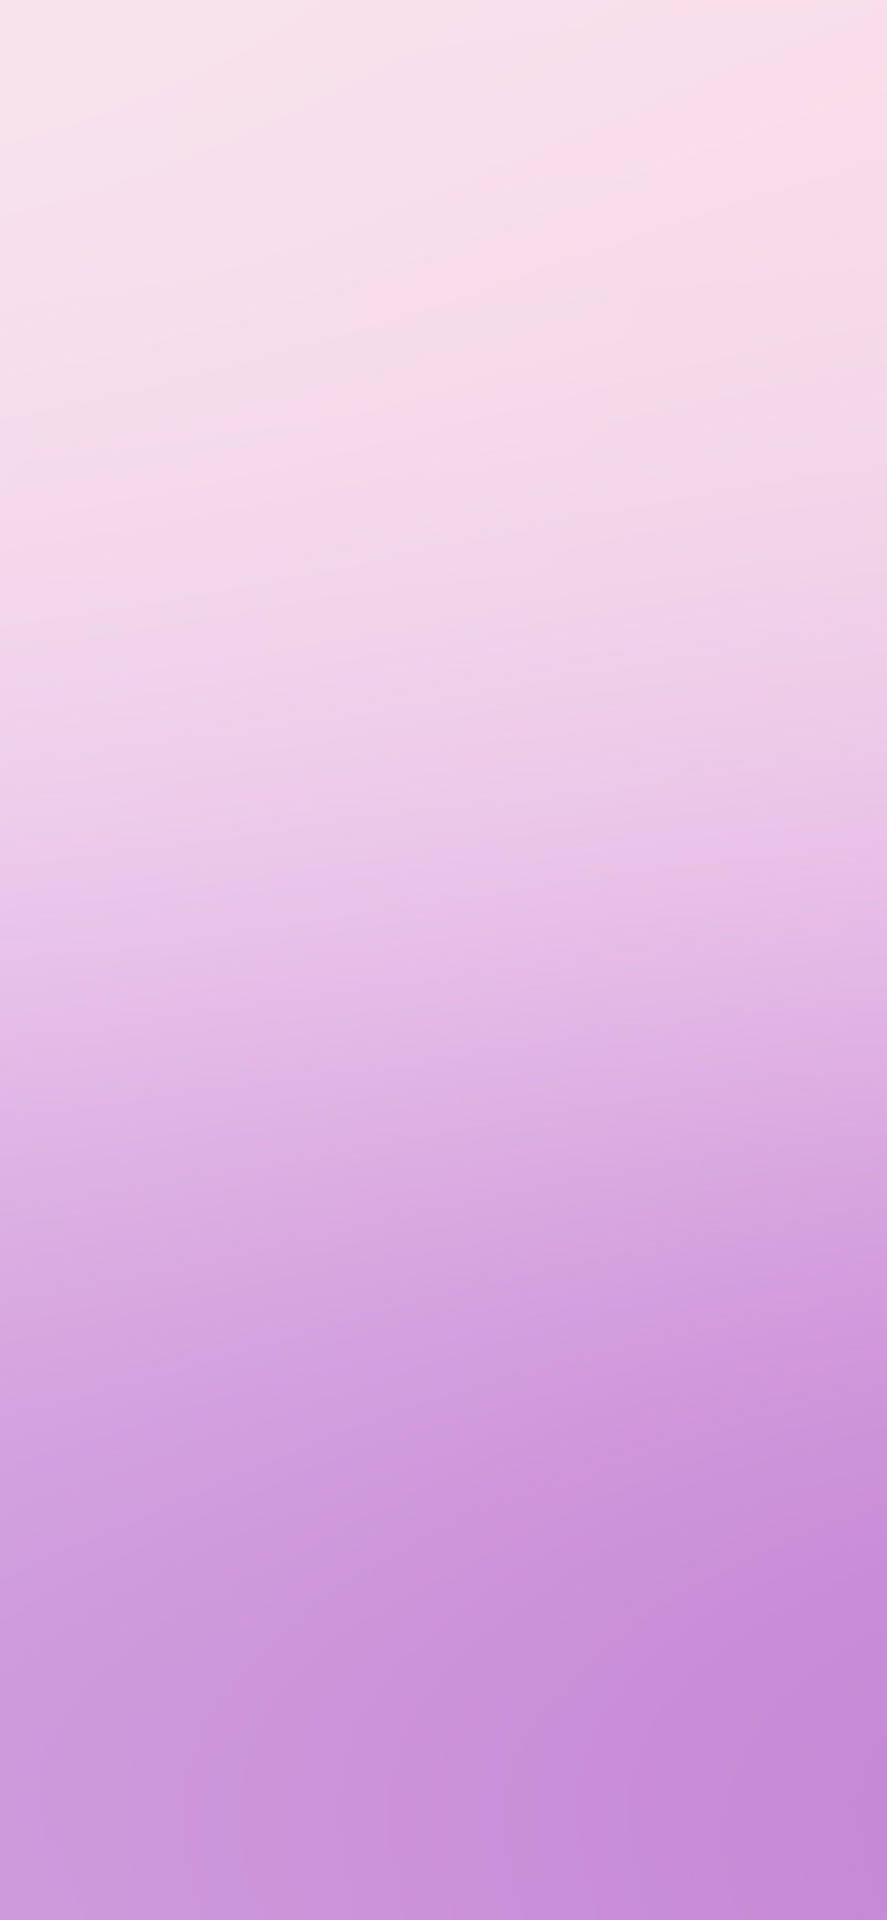 Pink And Light Purple Iphone Gradient Wallpaper